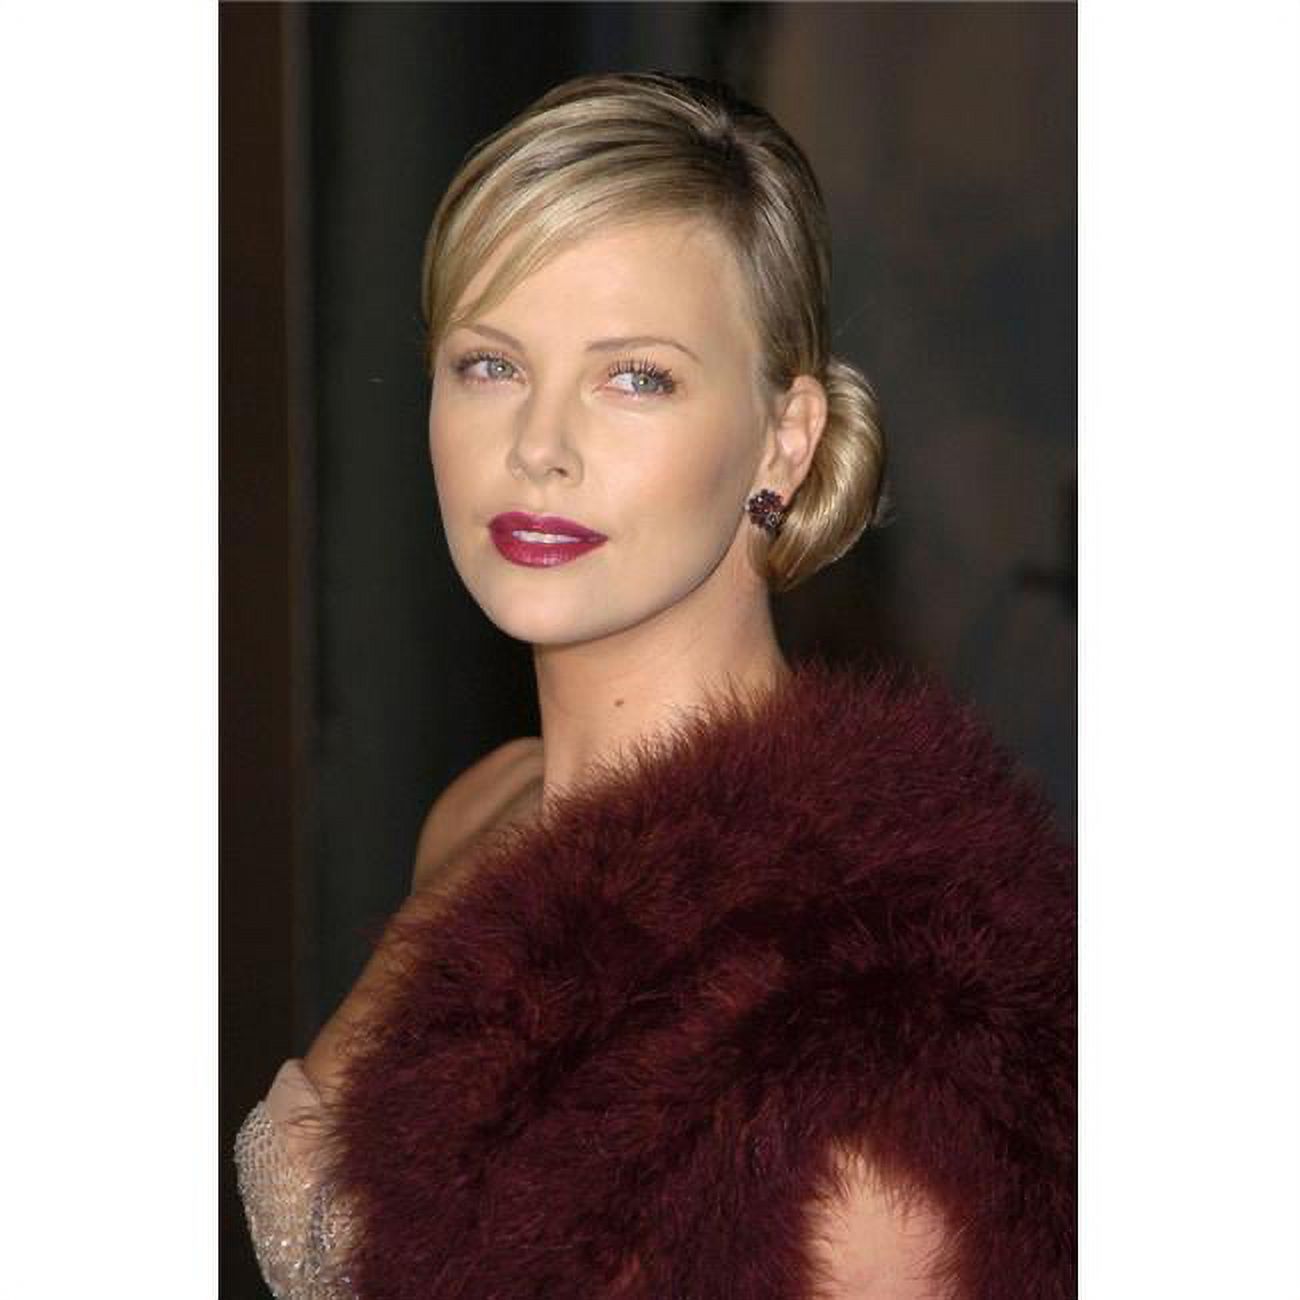 Everett Collection Charlize Theron At Arrivals for Aeon Flux Premiere The Arclight Hollywood Cinerama Dome Los Angeles Ca December 01 2005 Photo by David Longendyke Photo Print - 16 x 20 - Large - image 1 of 1